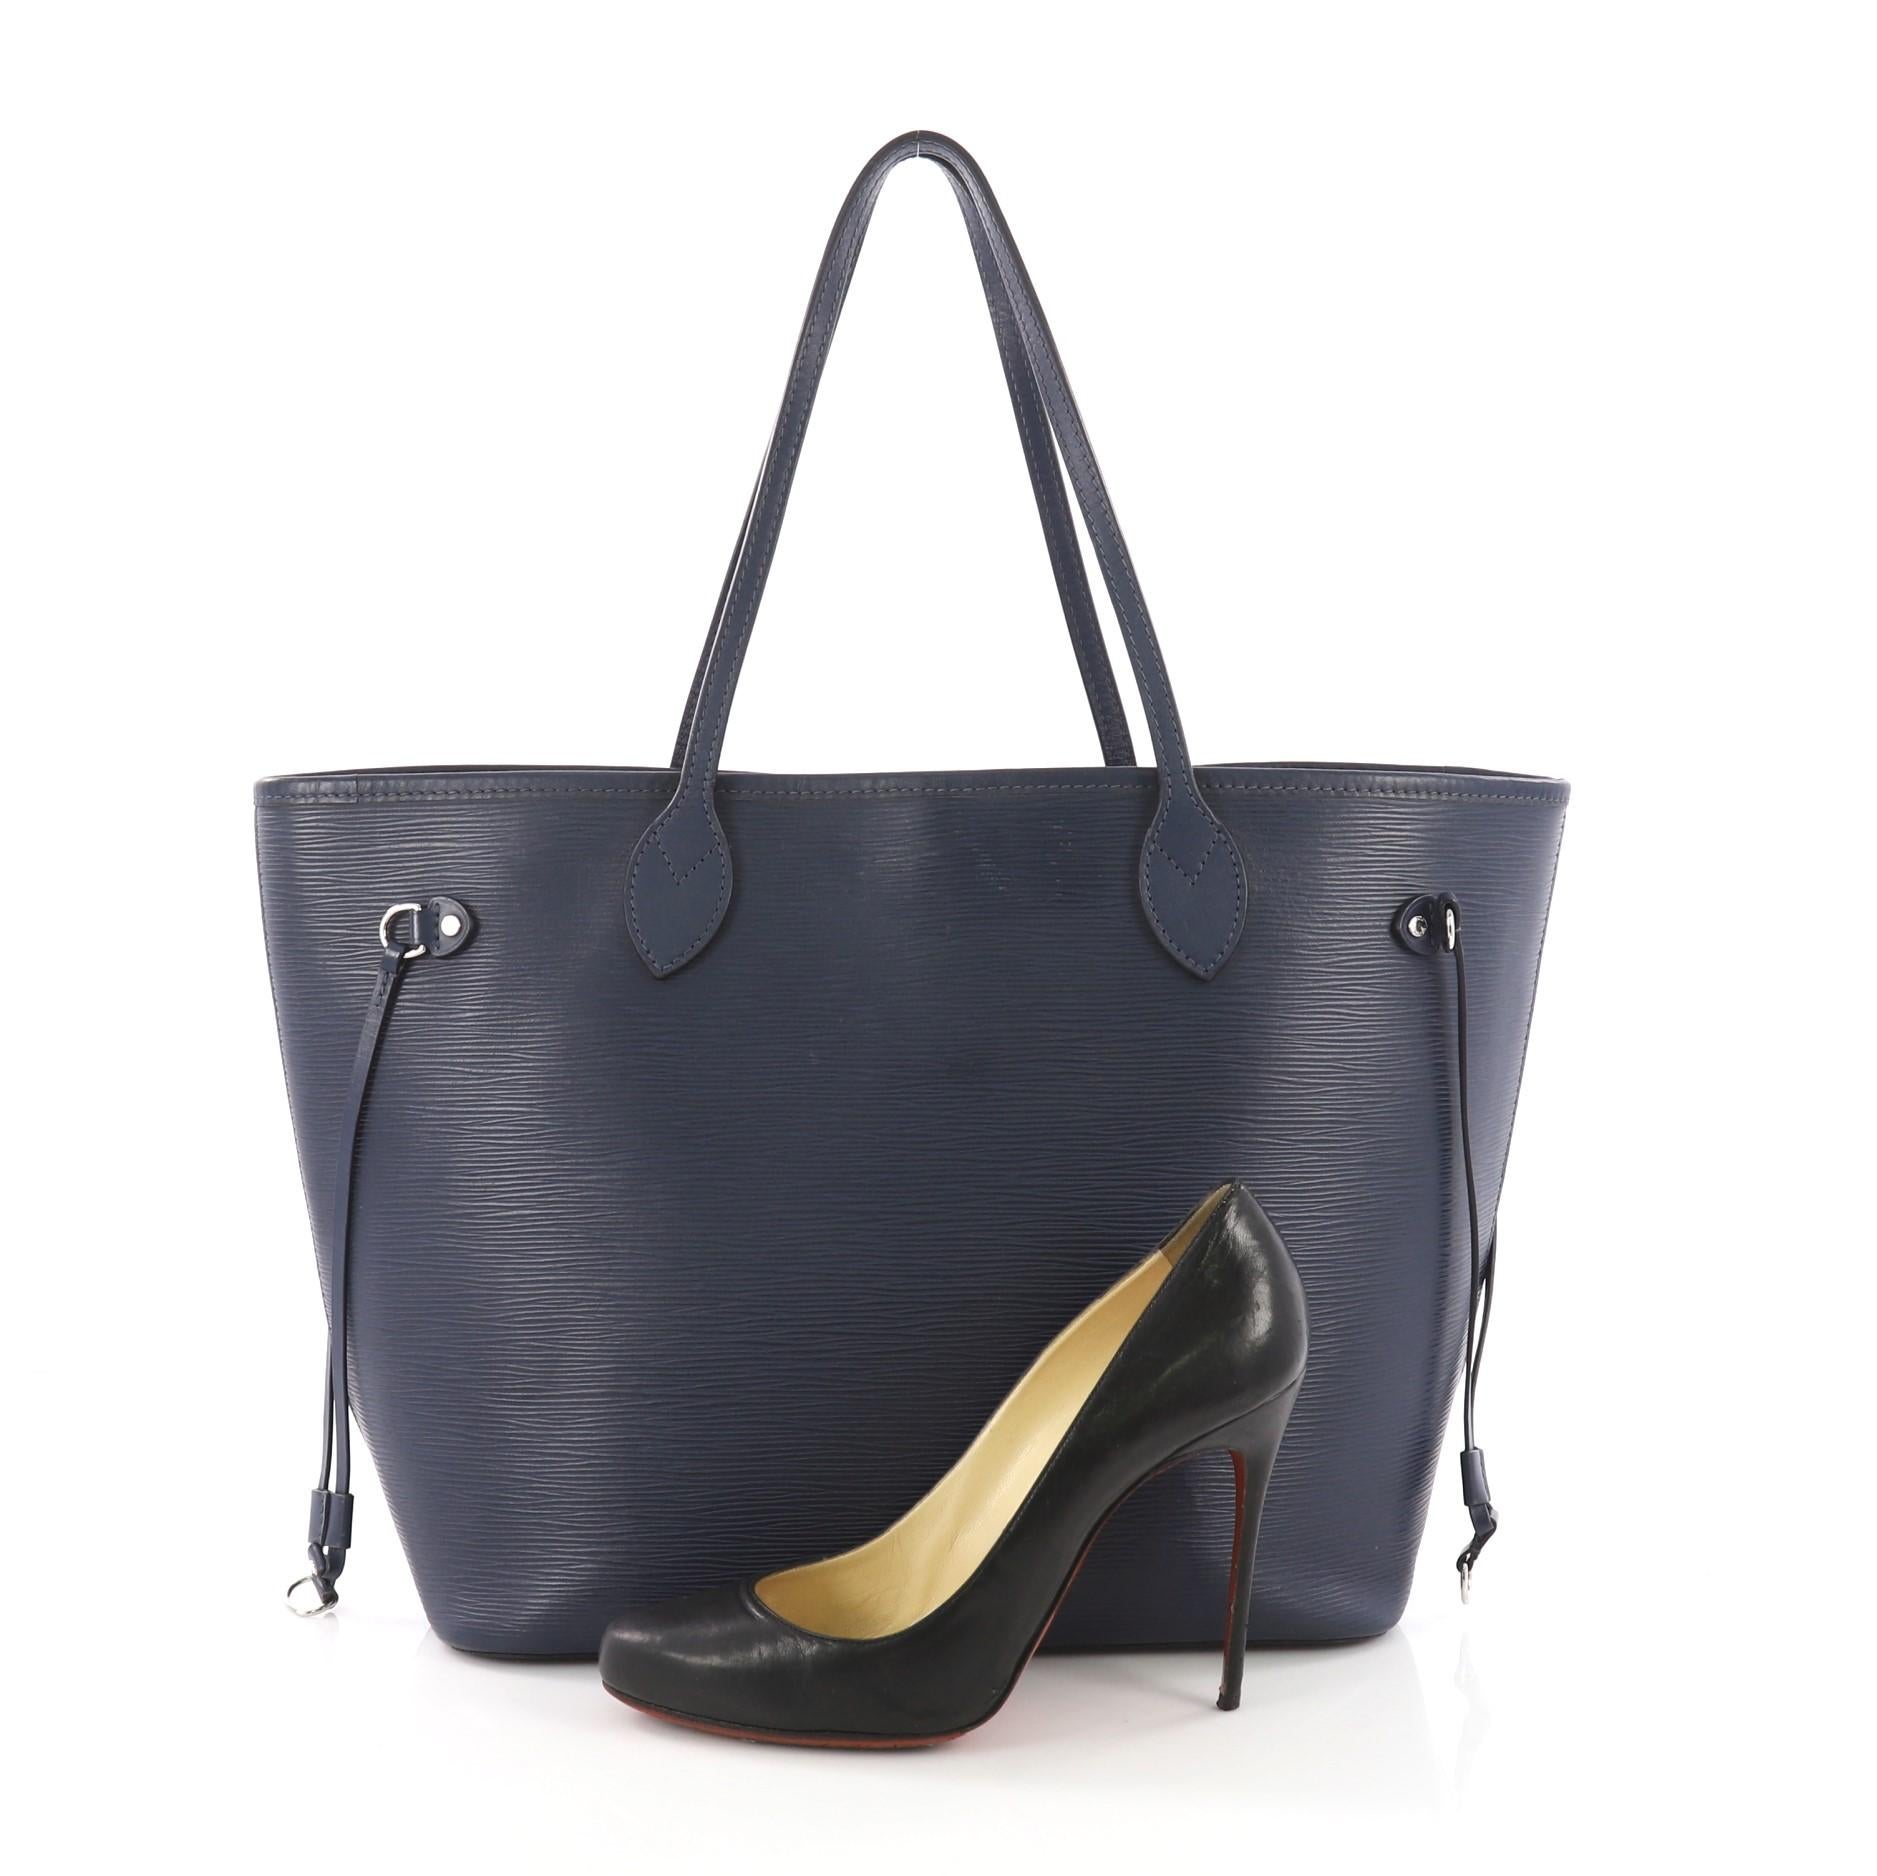 This Louis Vuitton Neverfull Tote Epi Leather MM, crafted in navy blue epi leather, features dual flat leather handles, side tassels, and silver-tone hardware. Its wide open top opens to a blue microfiber interior. **Note: Shoe photographed is used